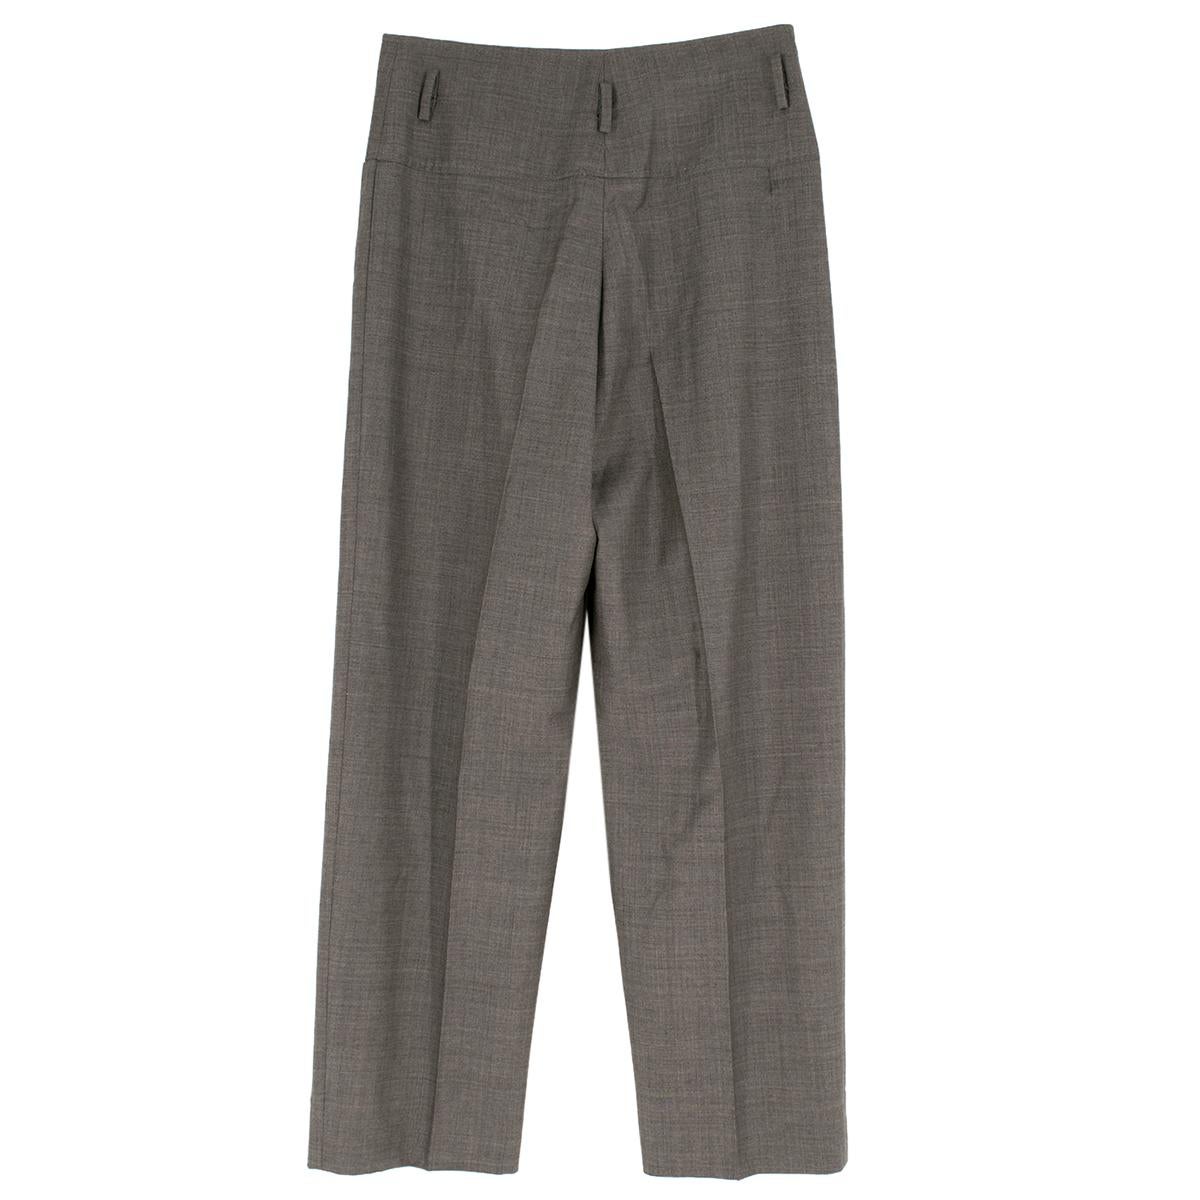 Stella McCartney Grey Wool Straight Trousers

- grey wool trousers
- straight relaxed fit 
- zip and button fastening 
- two front slip pockets 
- belt hoops

Please note, these items are pre-owned and may show some signs of storage, even when